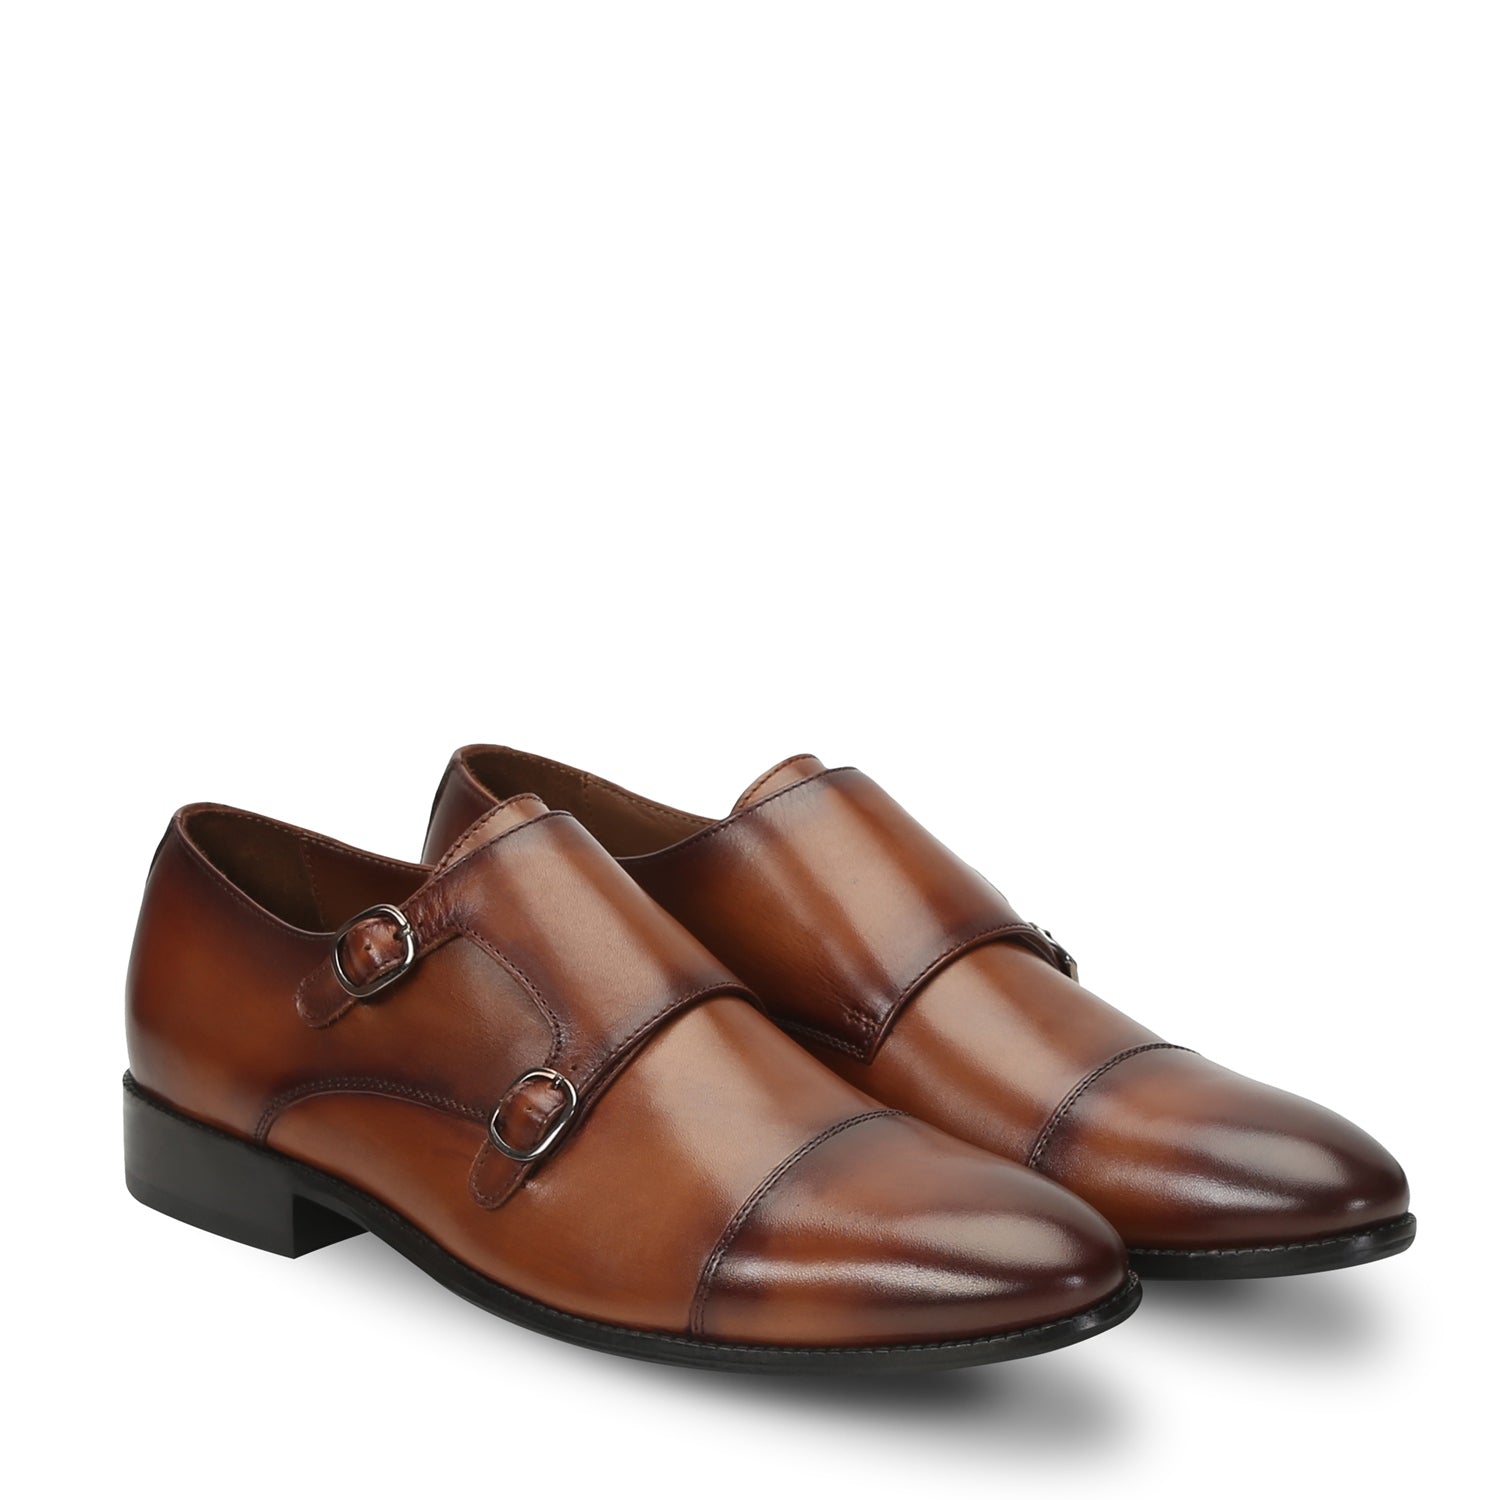 Dark Tan Leather Rounded Cap Toe Double Monk Strap Formal Shoes By Brune & Bareskin